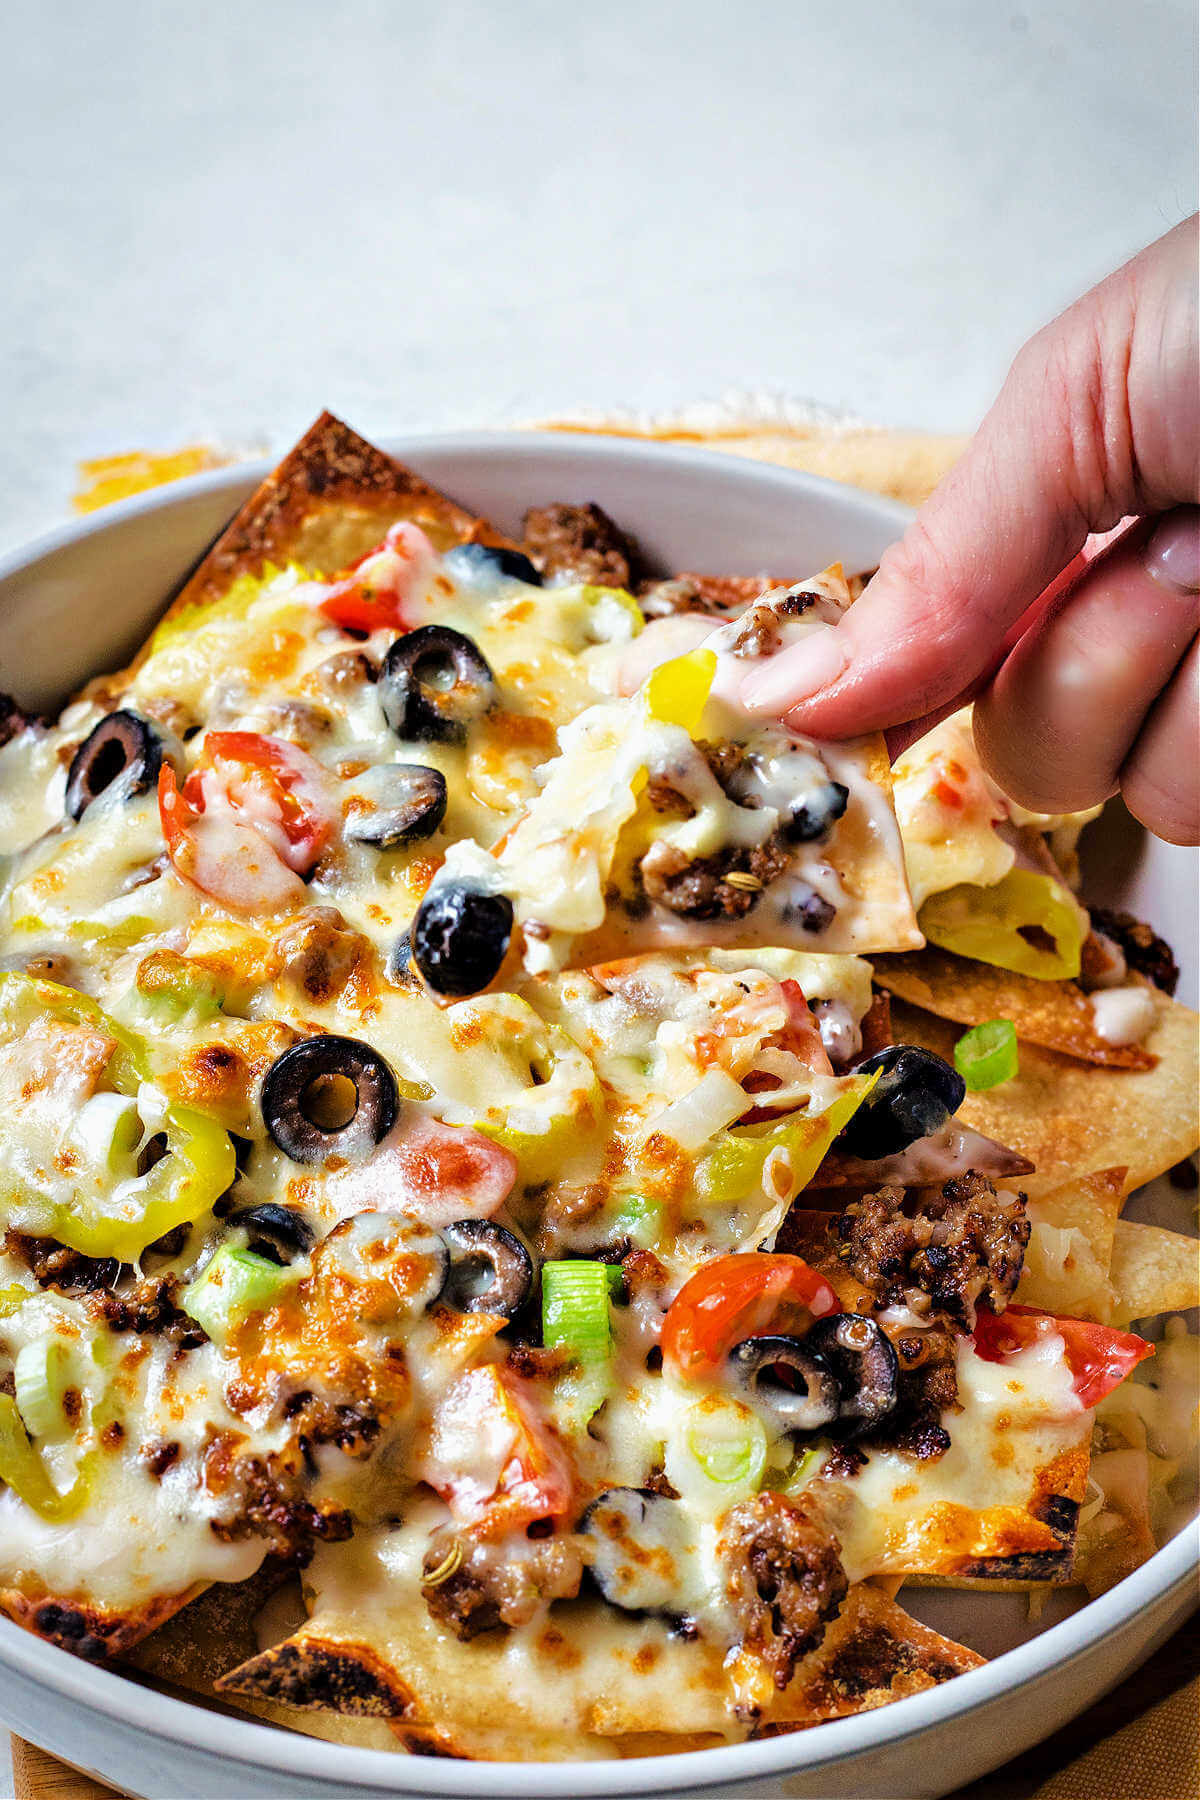 a hand picking up an Italian nacho from the pan.